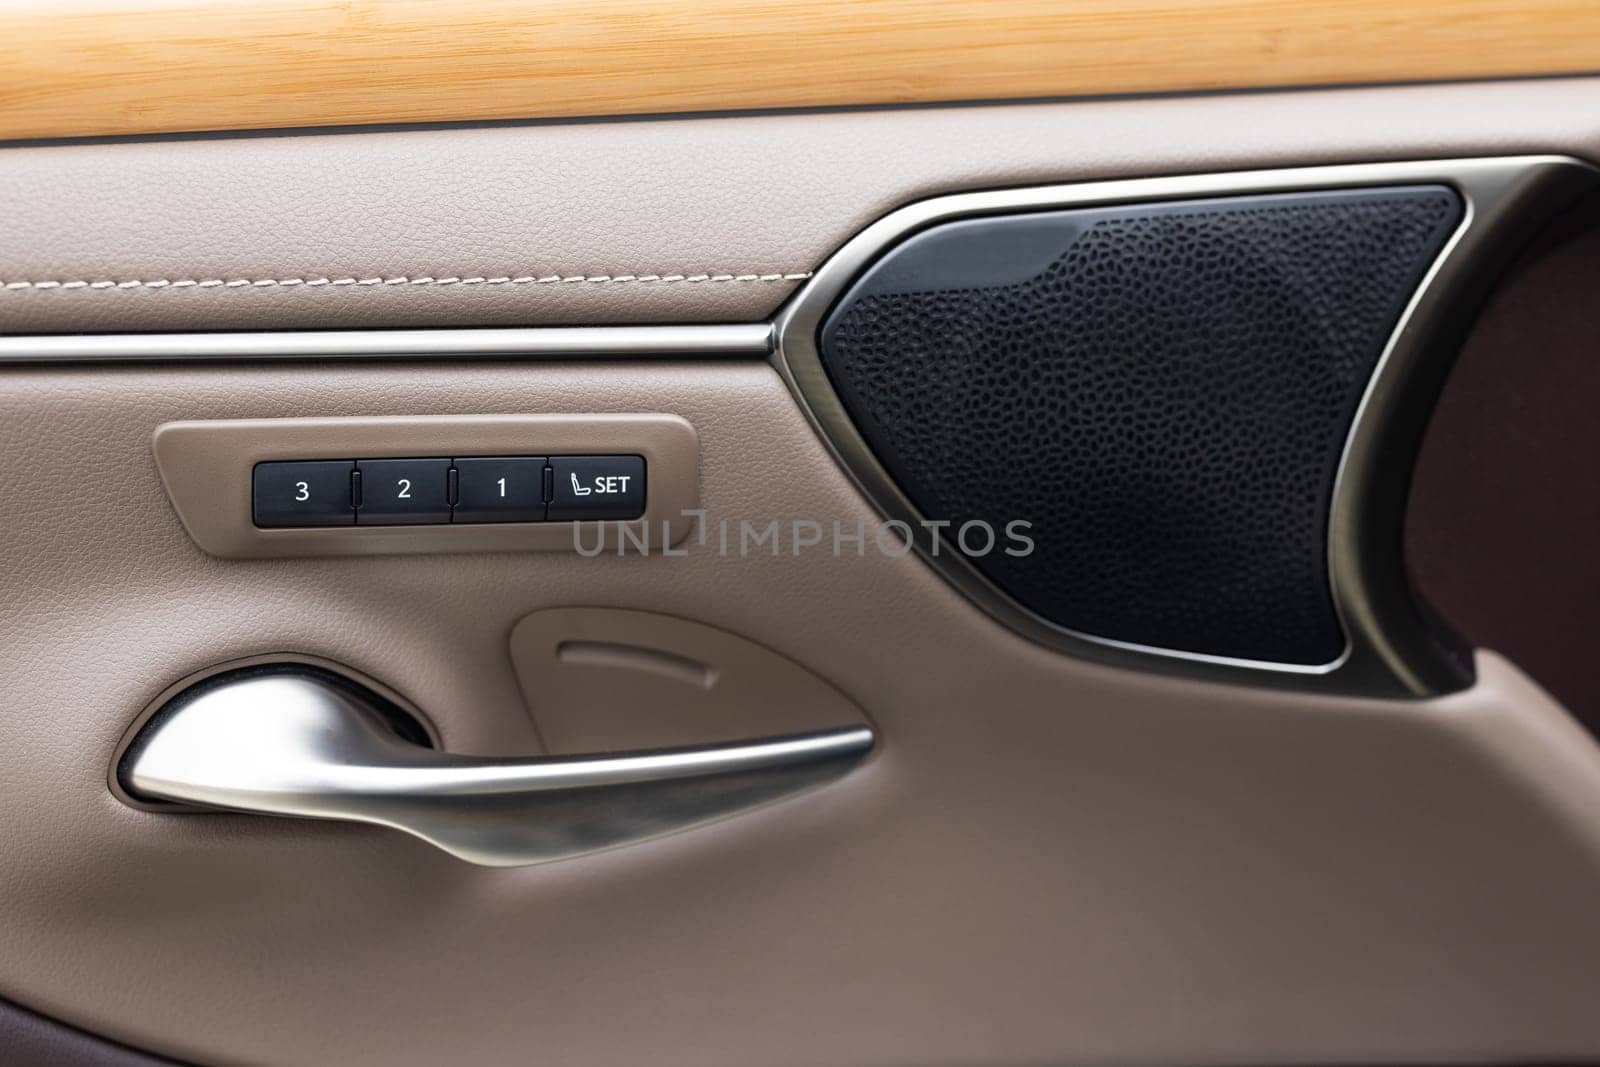 Buttons for adjusting seat position with memory. Car automatic seat memory control buttons close-up. Memory seat technology inside luxury vehicle car